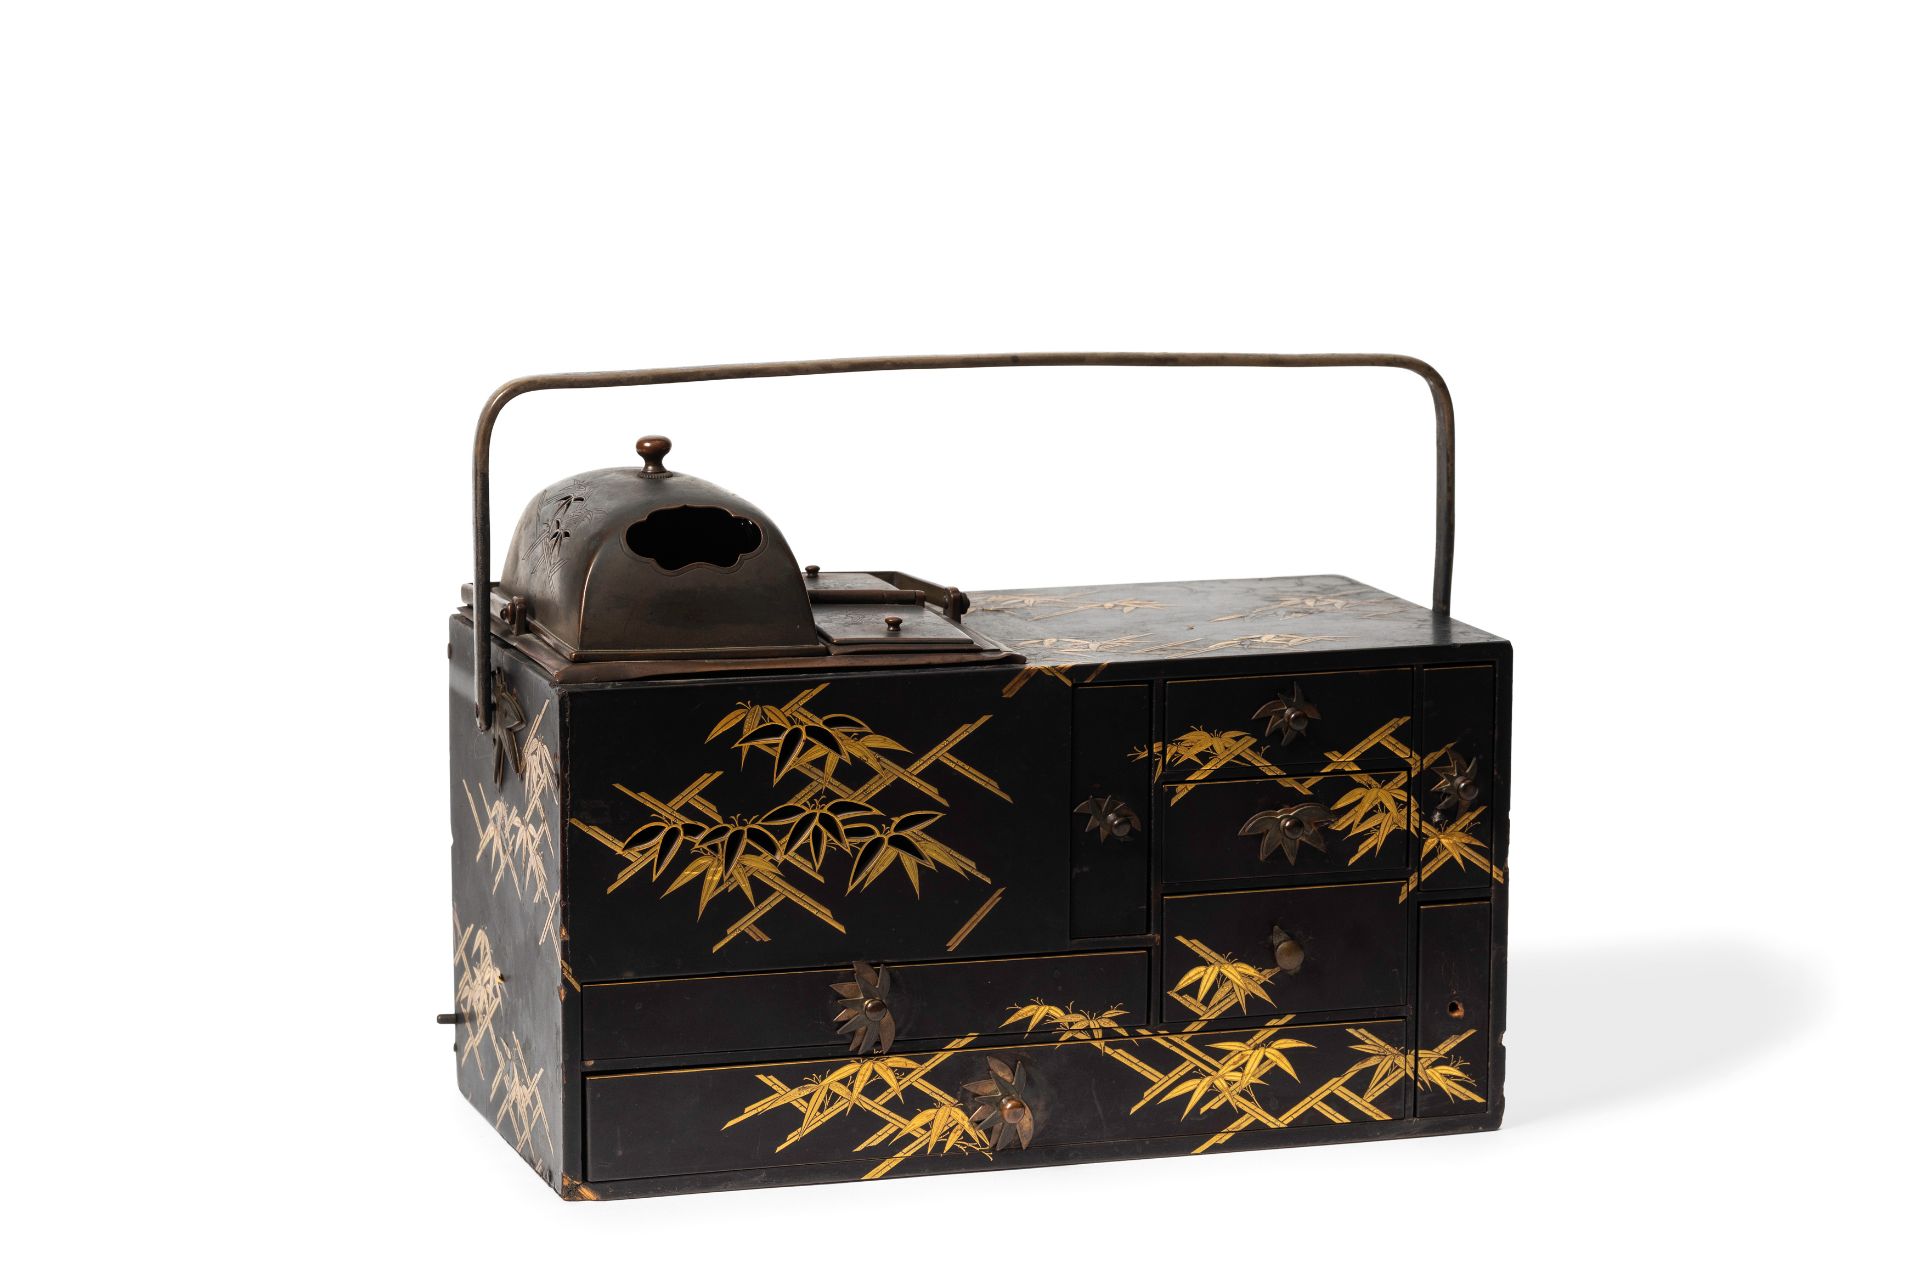 AN UNUSUAL BLACK AND GILT LAQUER CABINET FOR TOBACCO, JAPAN, MEIJI PERIOD (1869-1912)